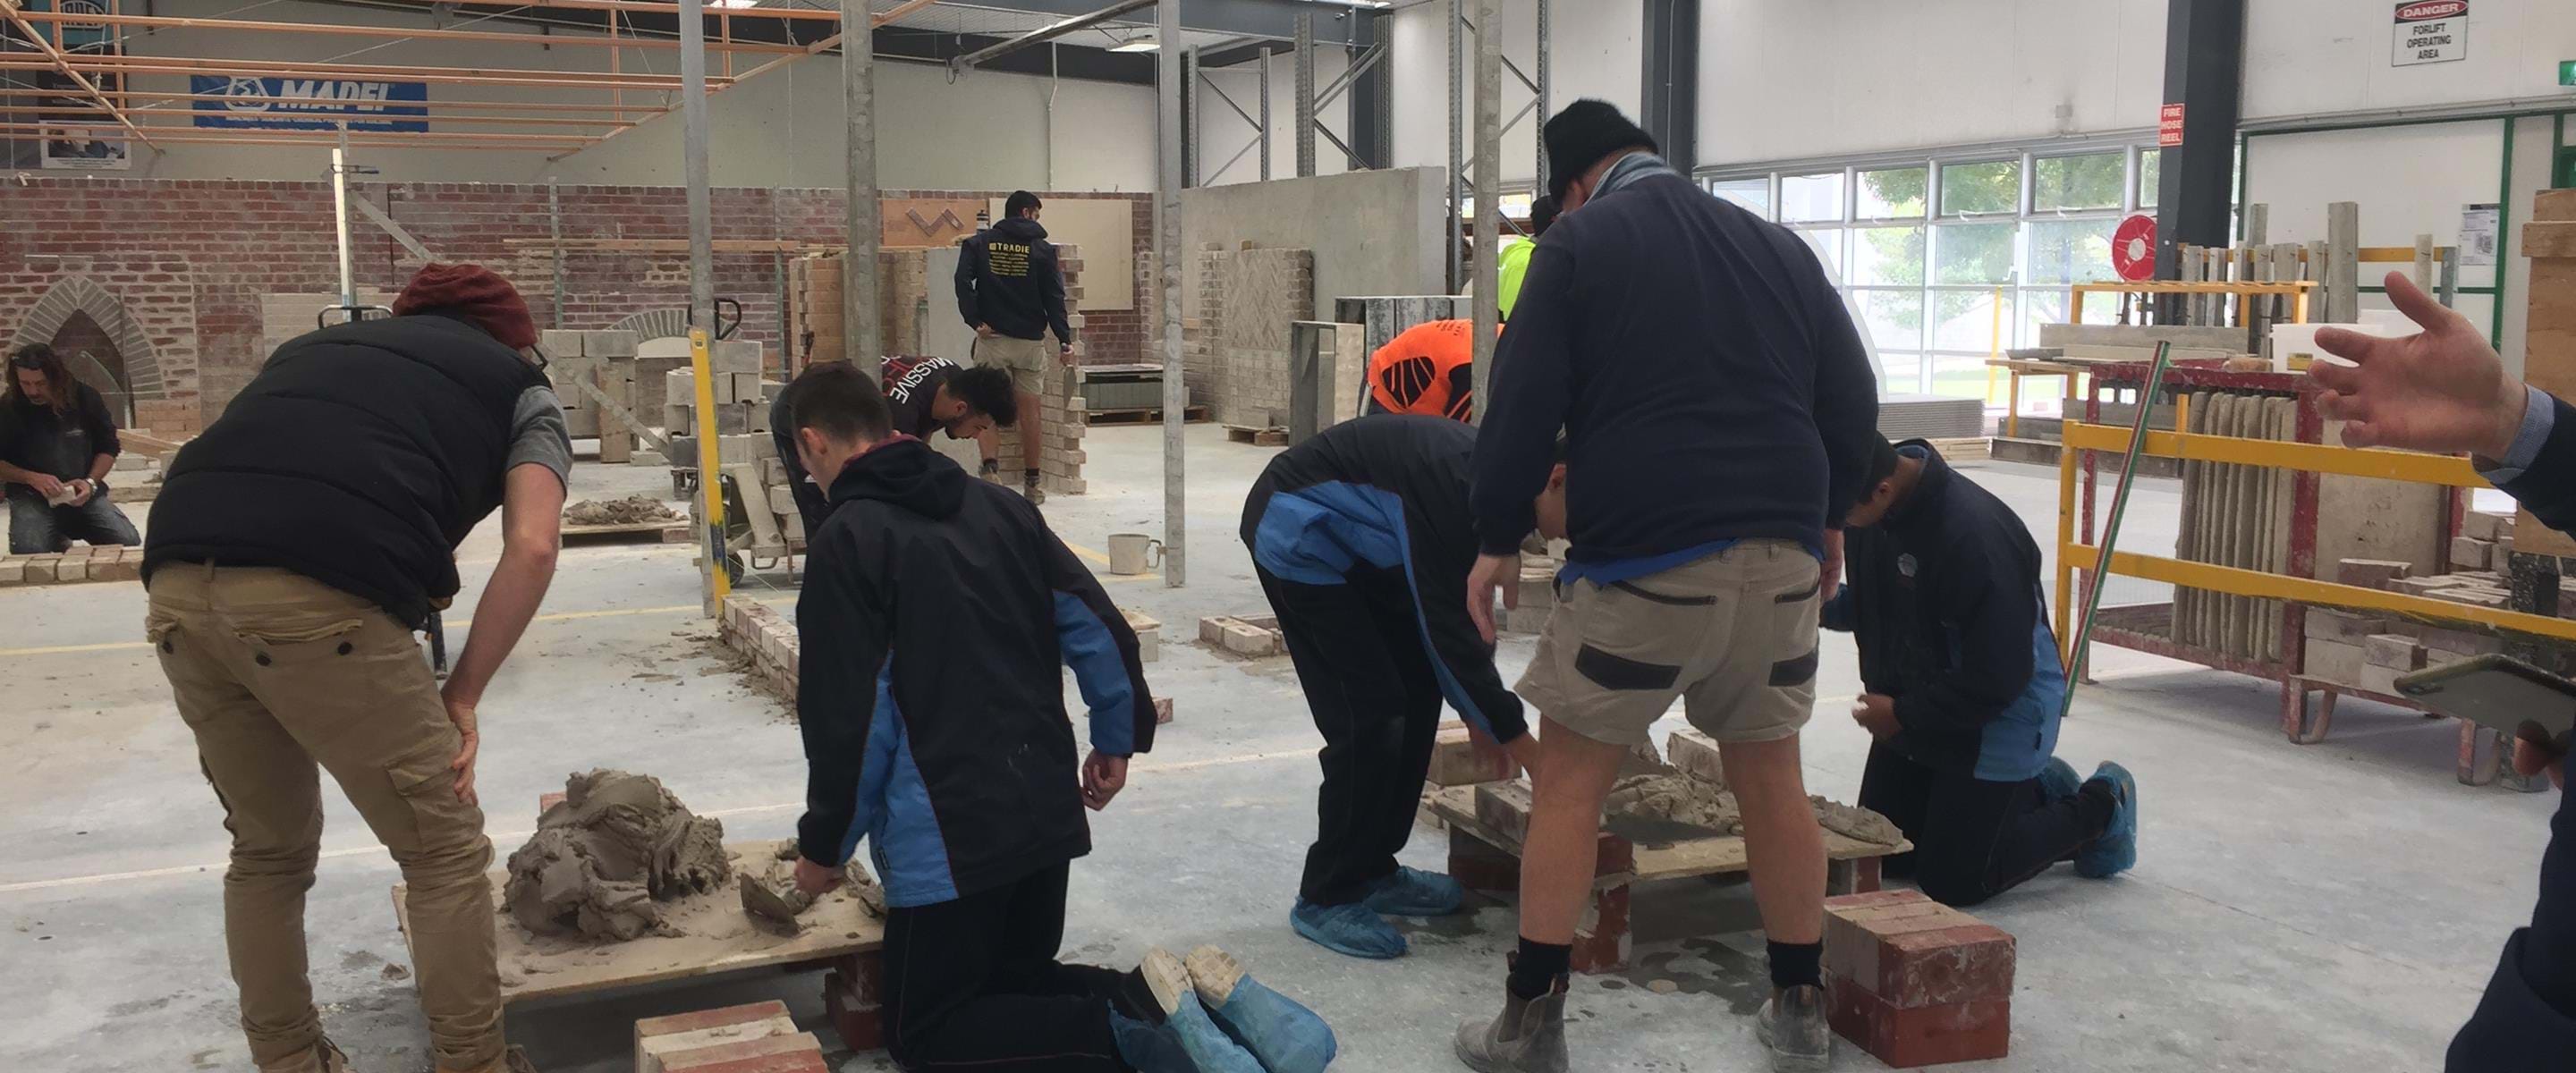 Melbourne Polytechnic Bricklaying students with concrete mix and brick stacks